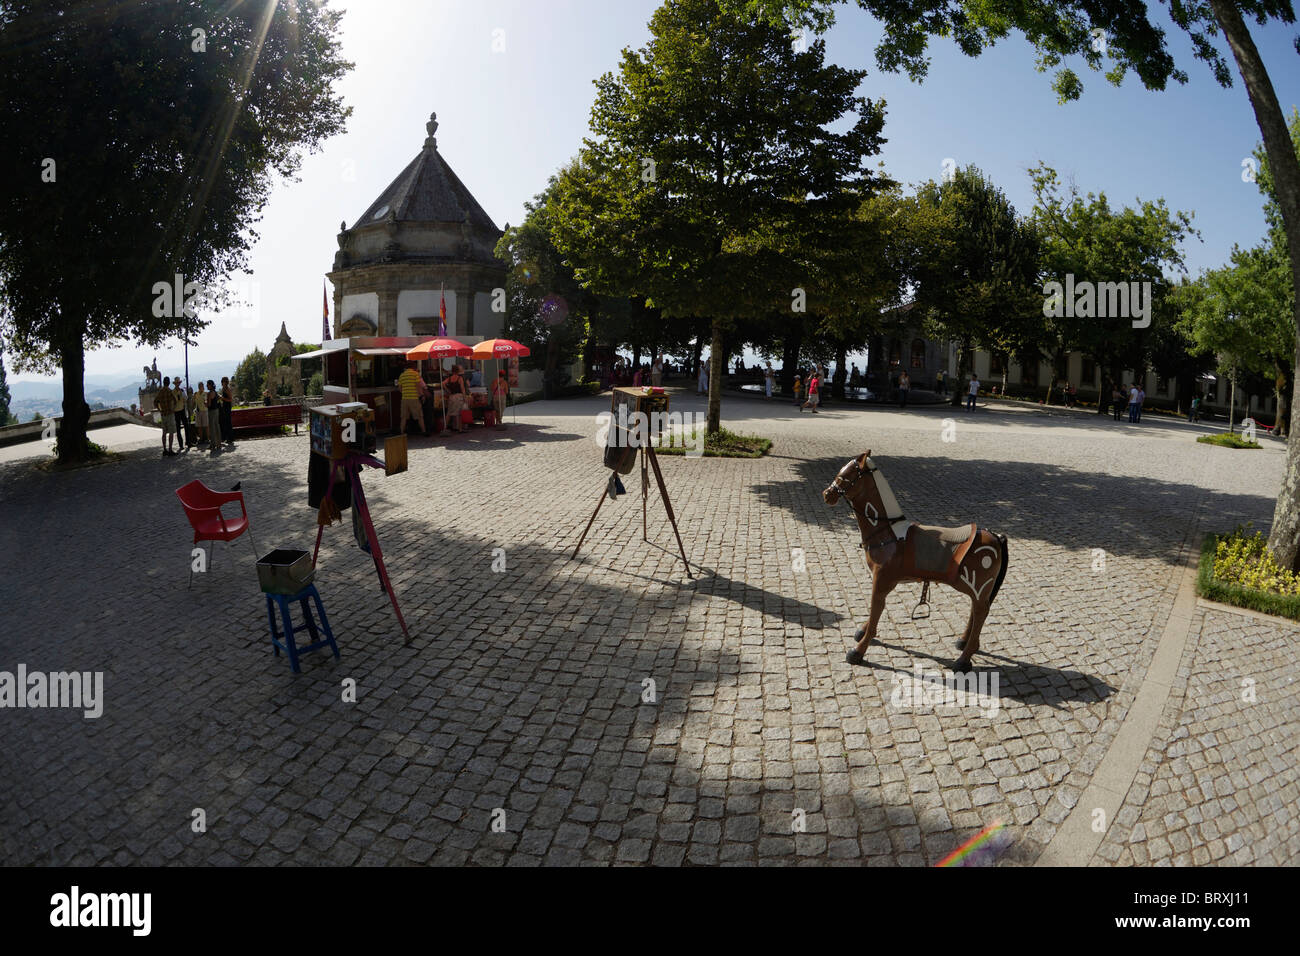 Wooden horse set up for photographing children by old fashioned cameras at the sanctuary of Bom Jesus do Monte in Portugal. Stock Photo